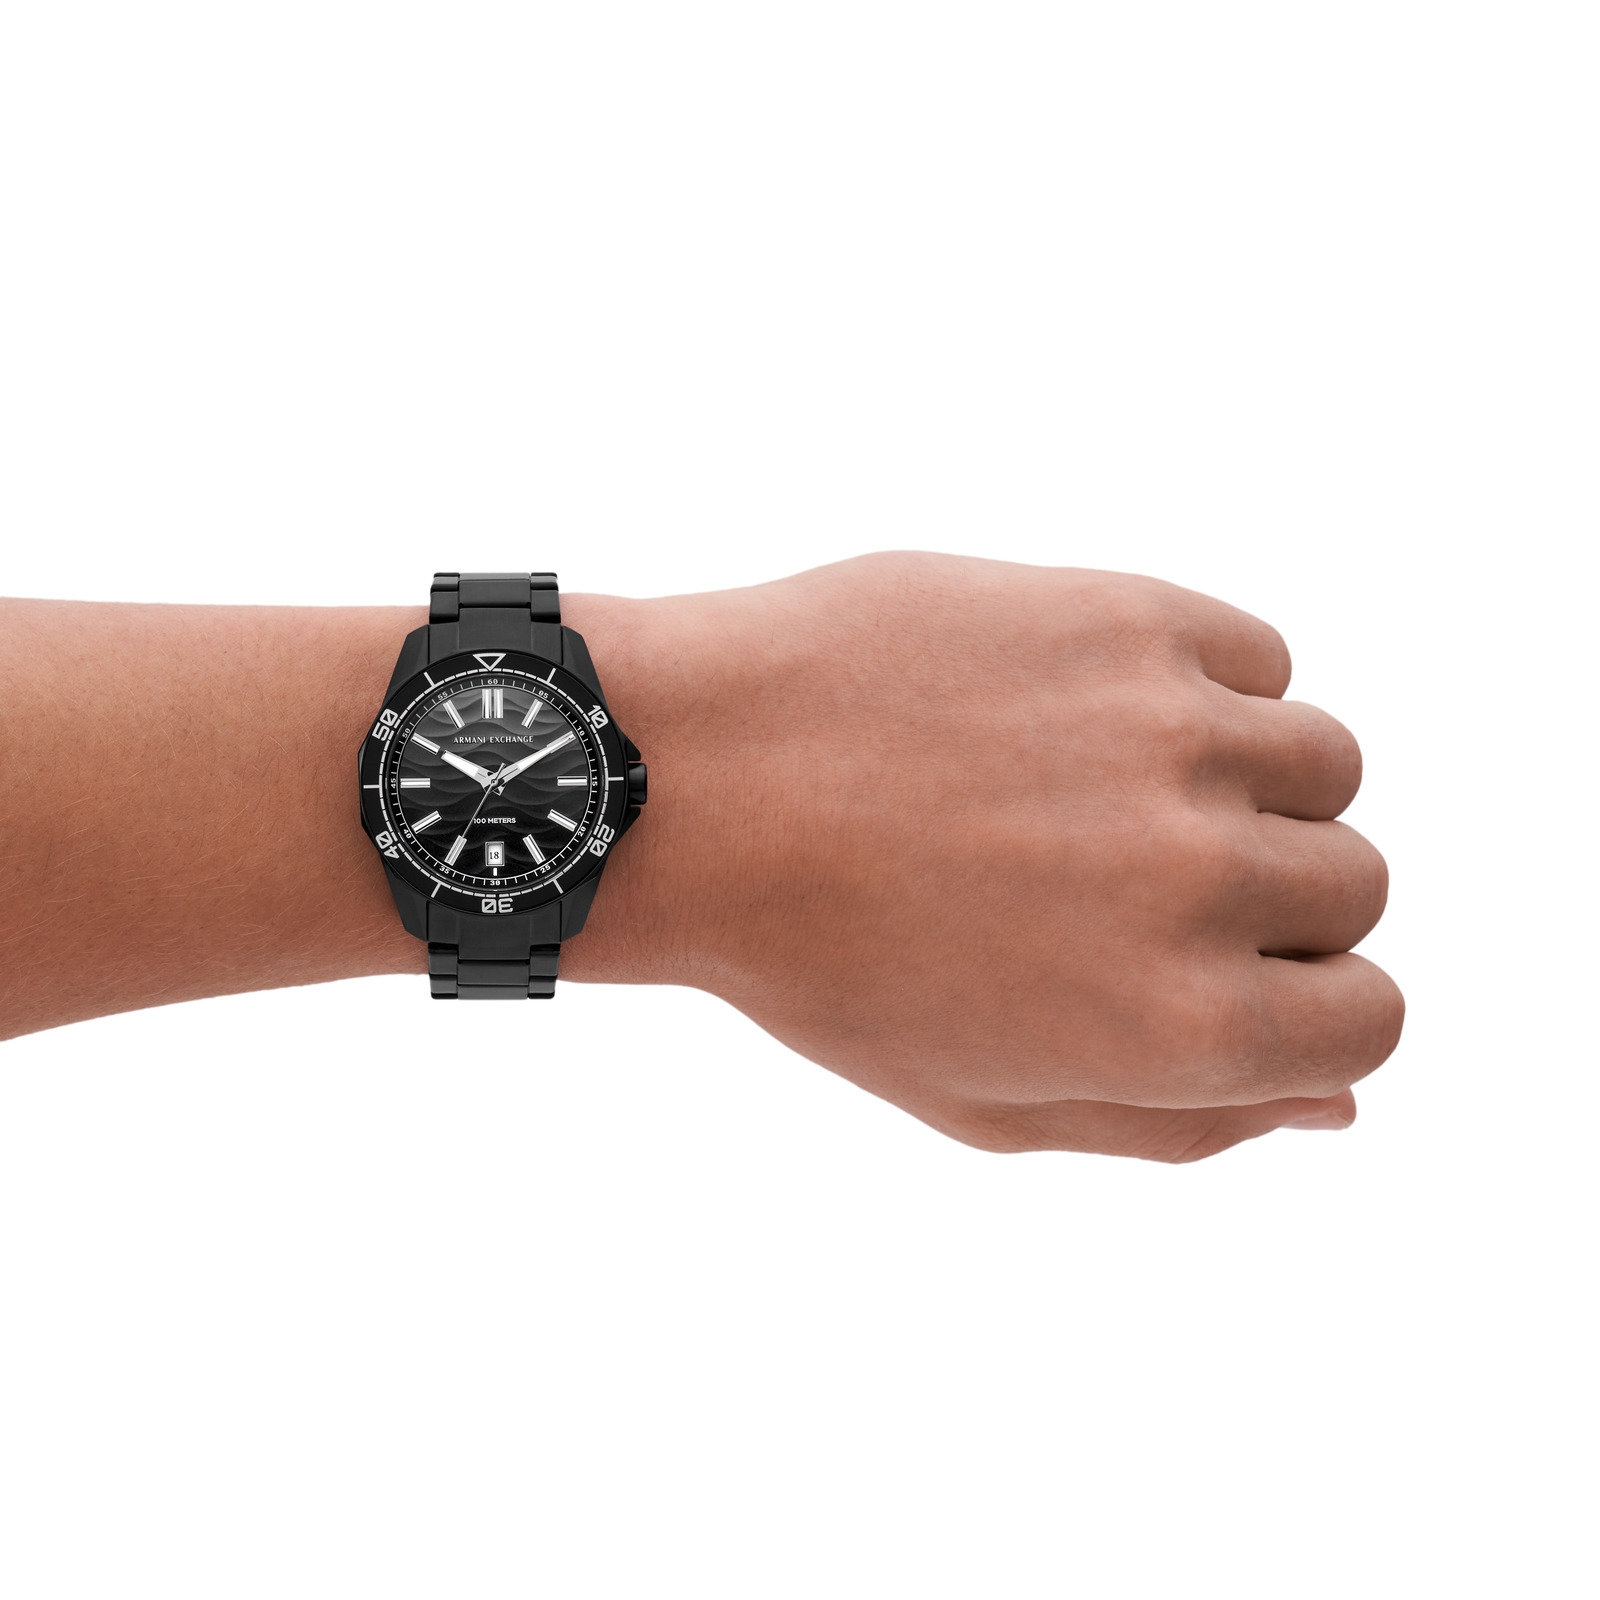 New] Apple Watch Ultra 2 | Switch Apple Premium Reseller in Malaysia